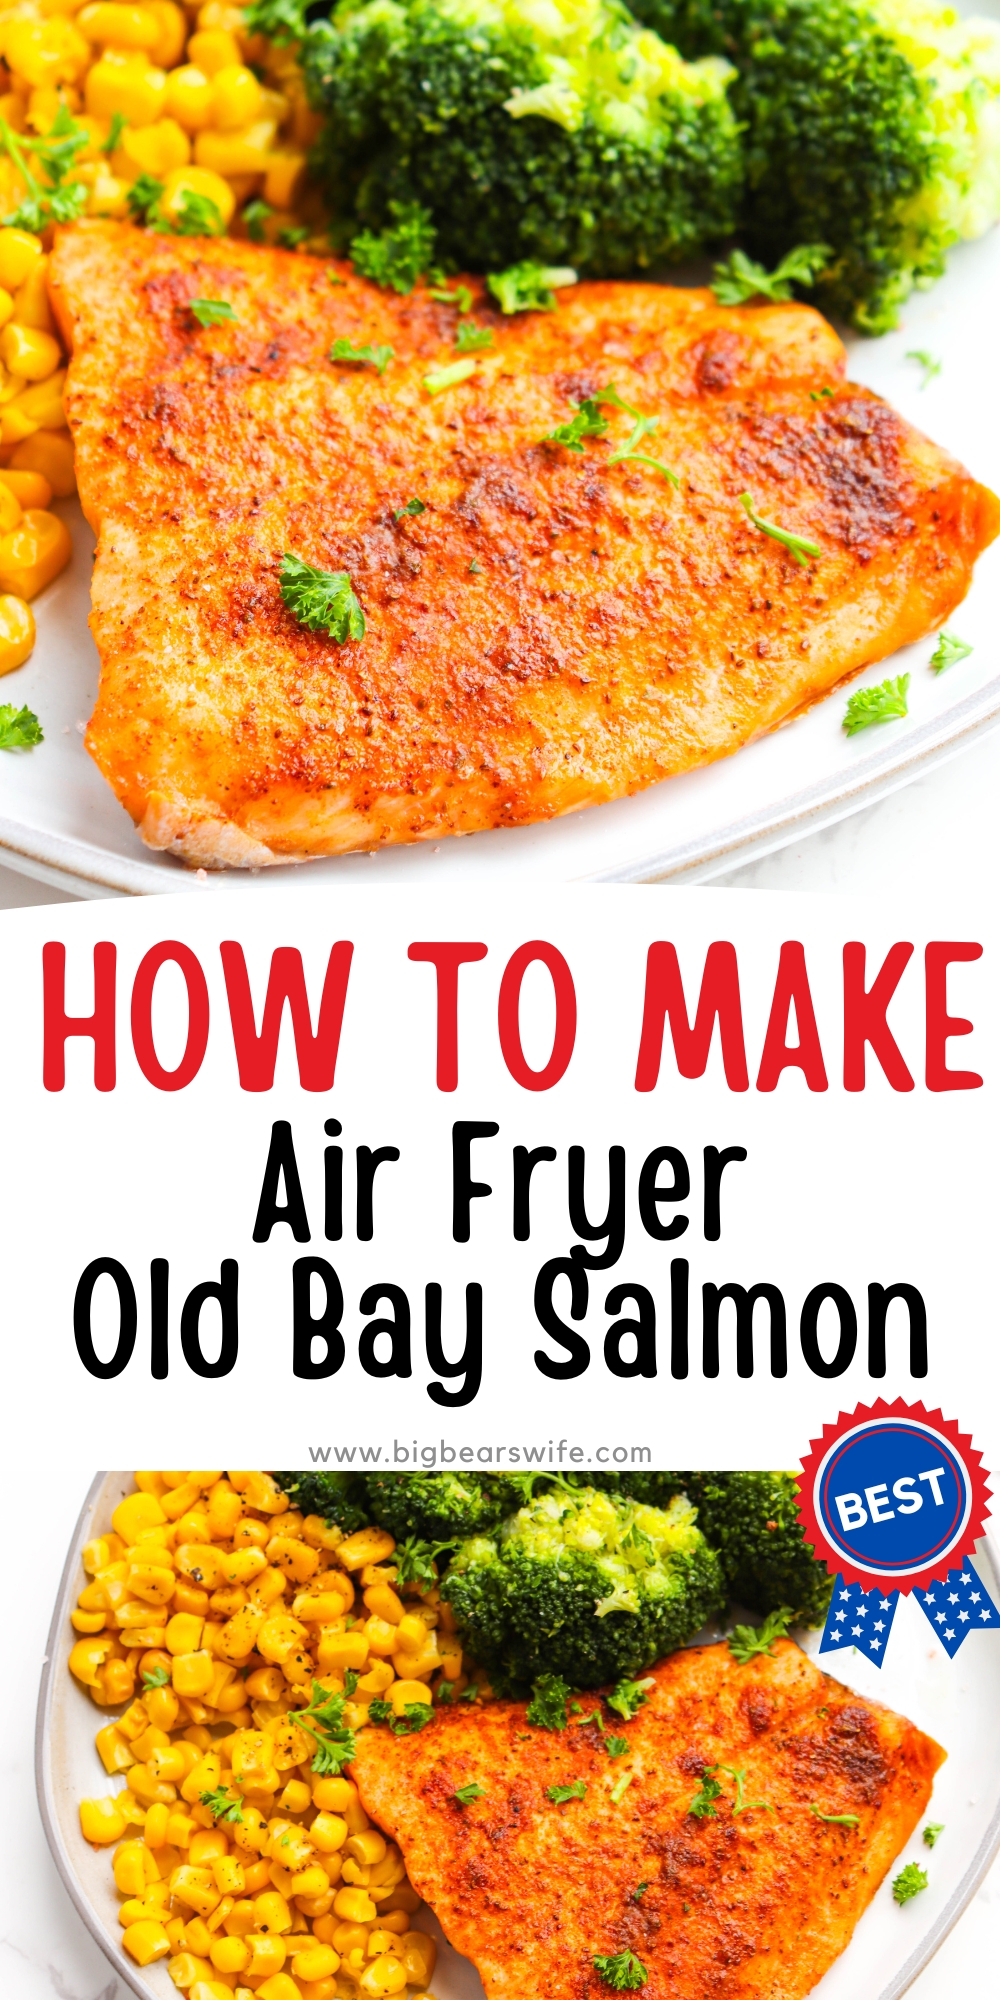 Transform your weeknight meals with this easy and delicious recipe for Old Bay salmon cooked to perfection in an air fryer. Air Fryer Old Bay Salmon will be a new favorite in no time! via @bigbearswife